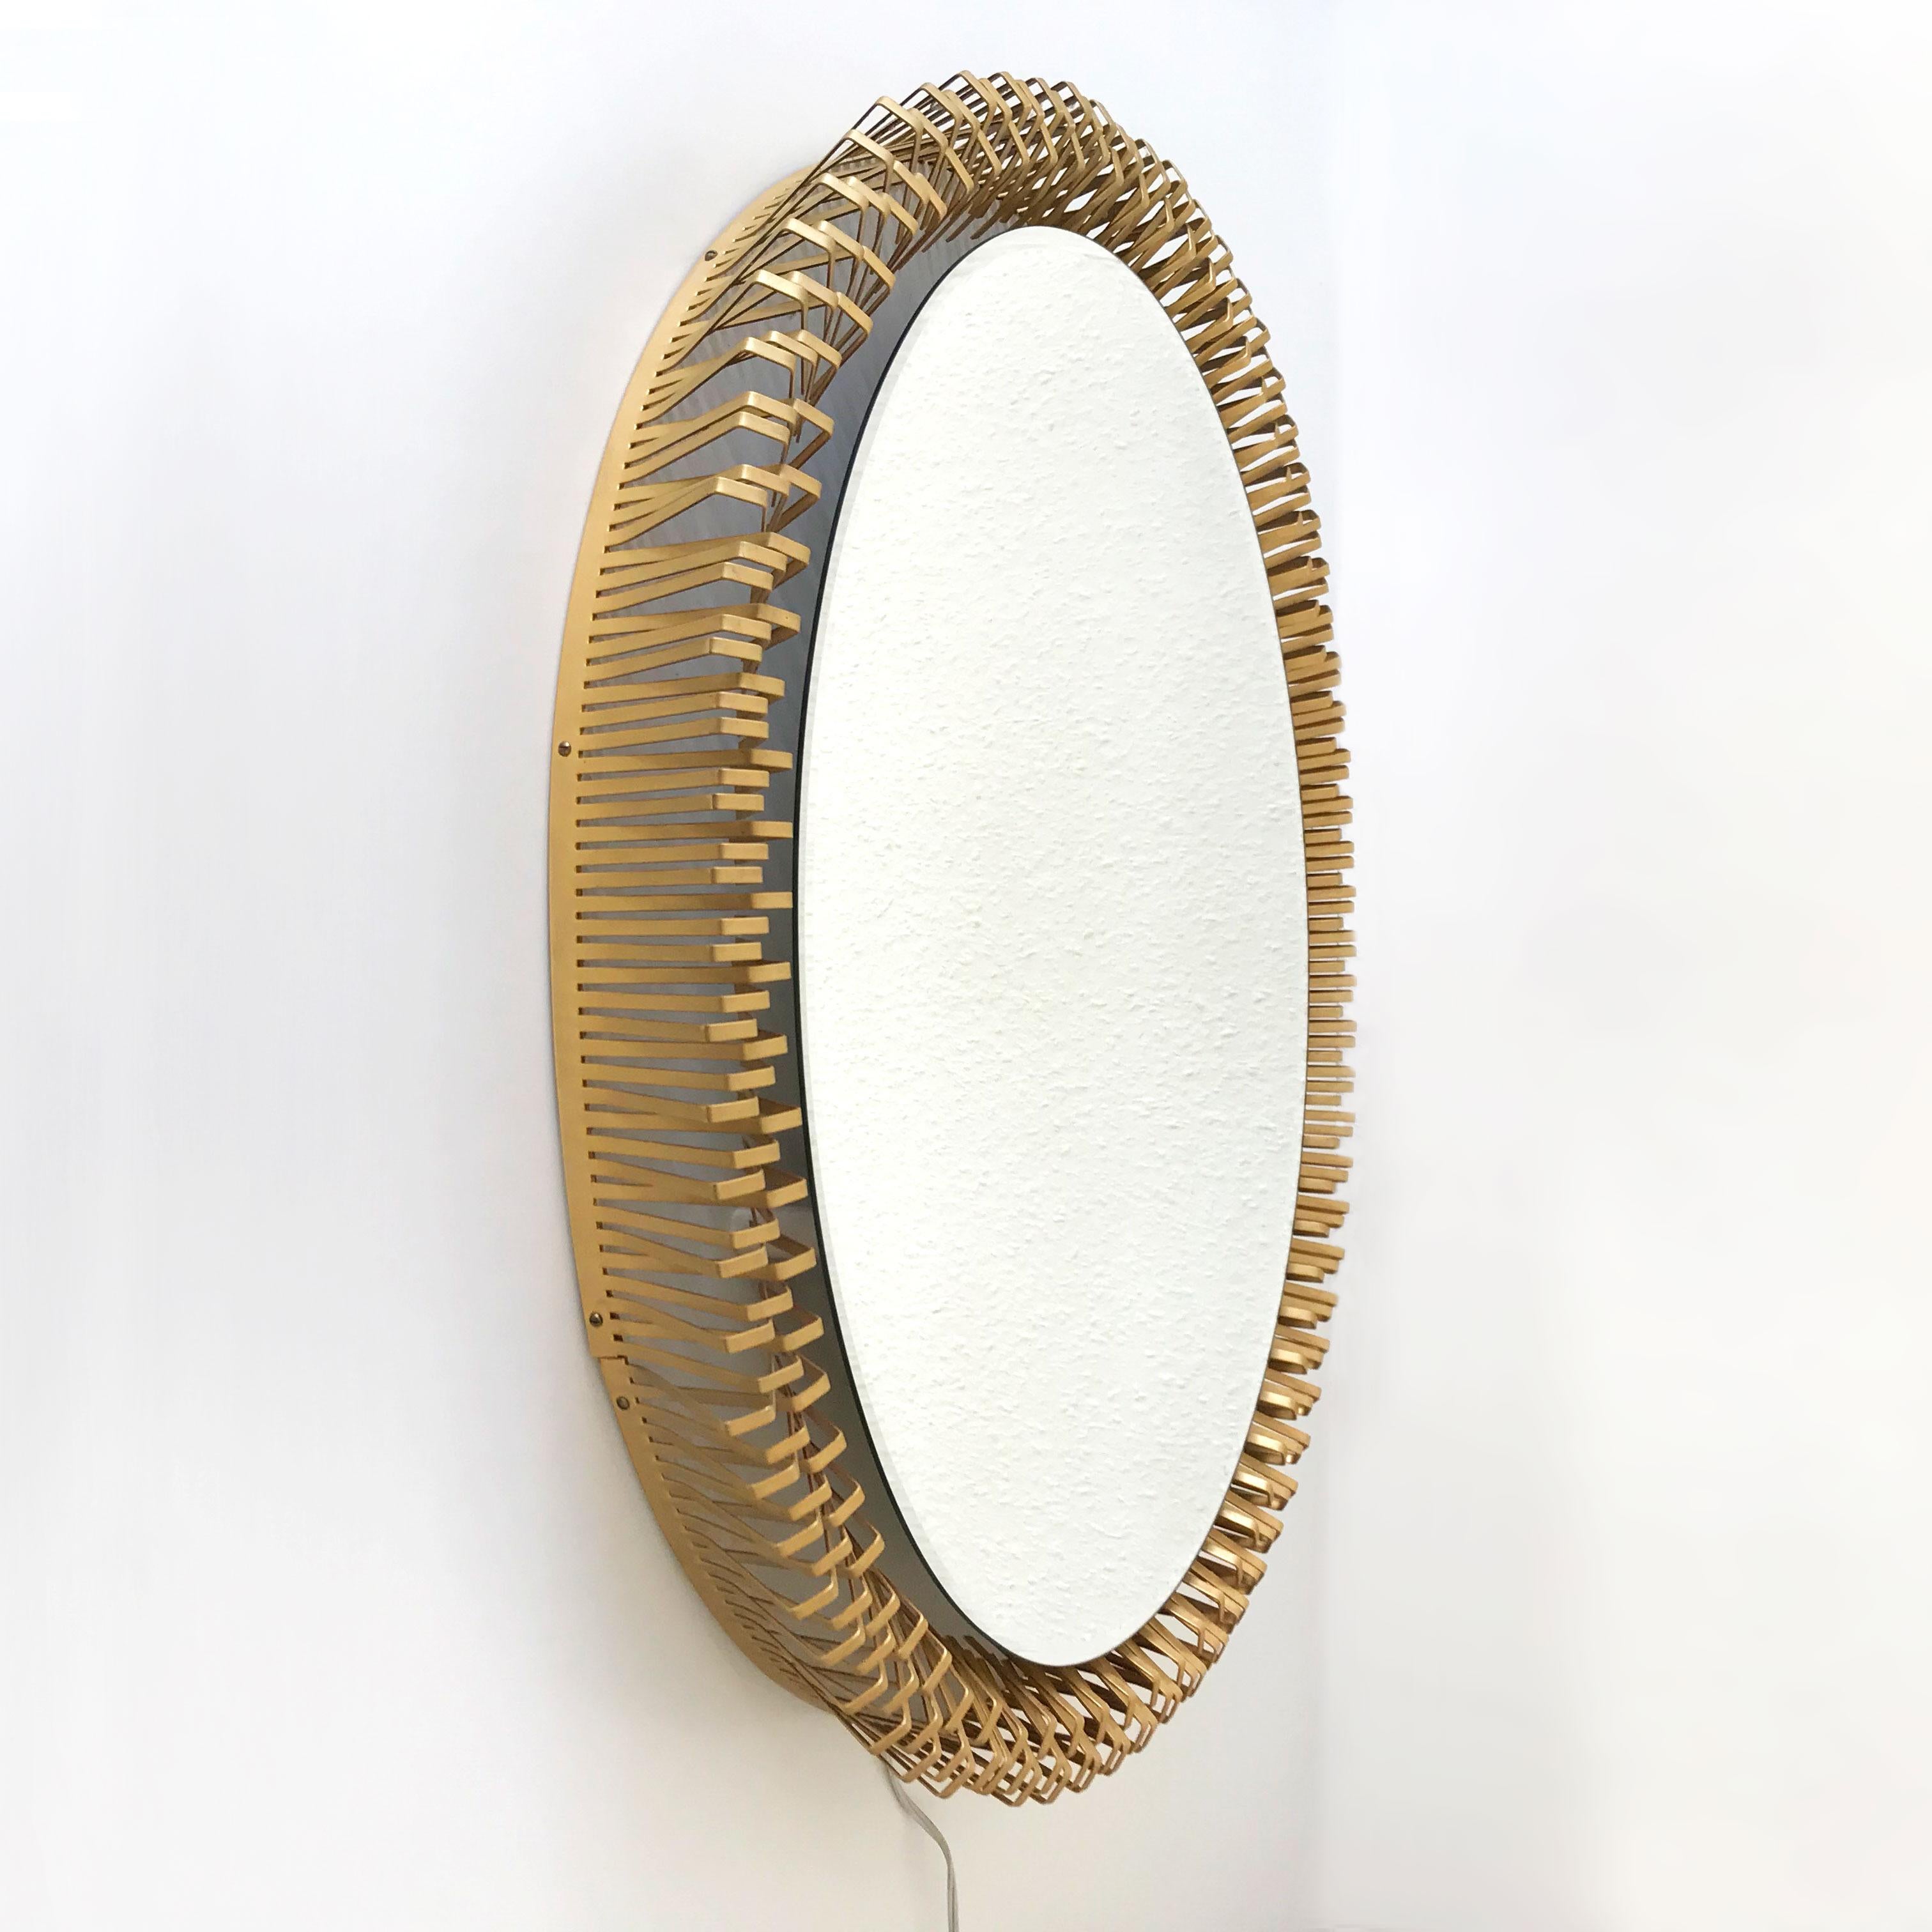 Exceptional Mid-Century Modern Backlit Wall Mirror by Schöninger, 1950s, Germany 2